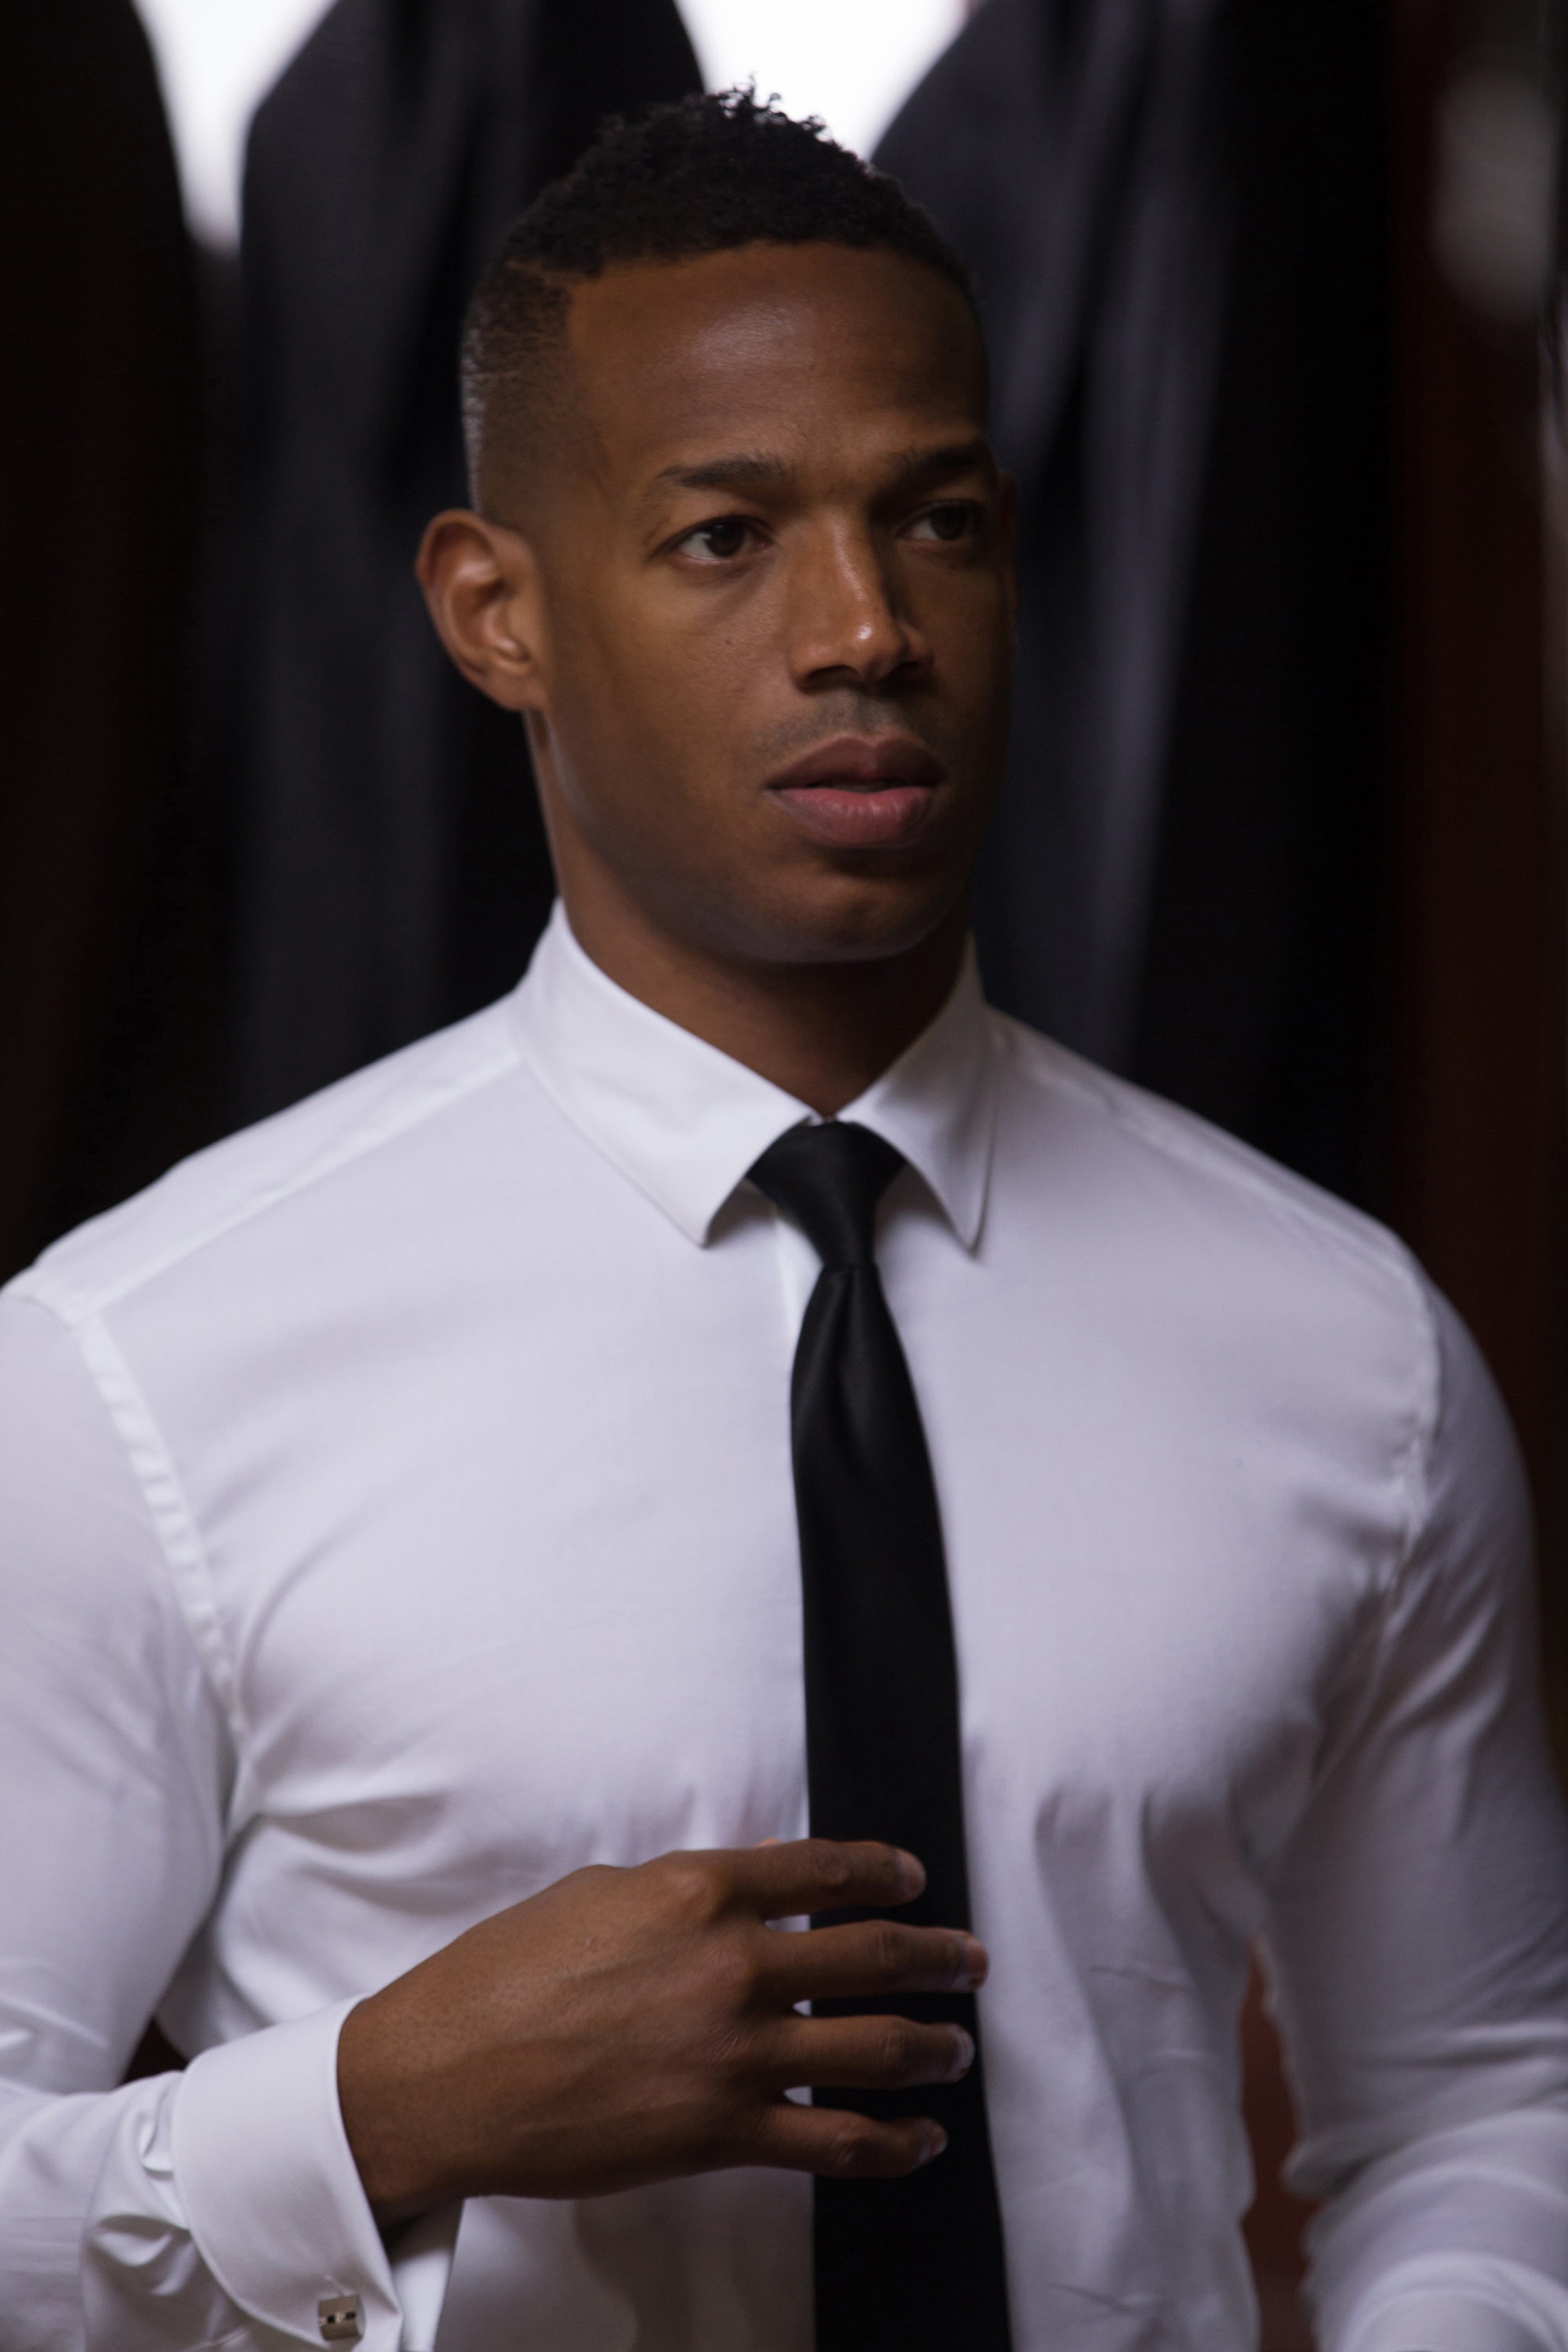 Marlon Wayans in FIFTY SHADES OF BLACK.